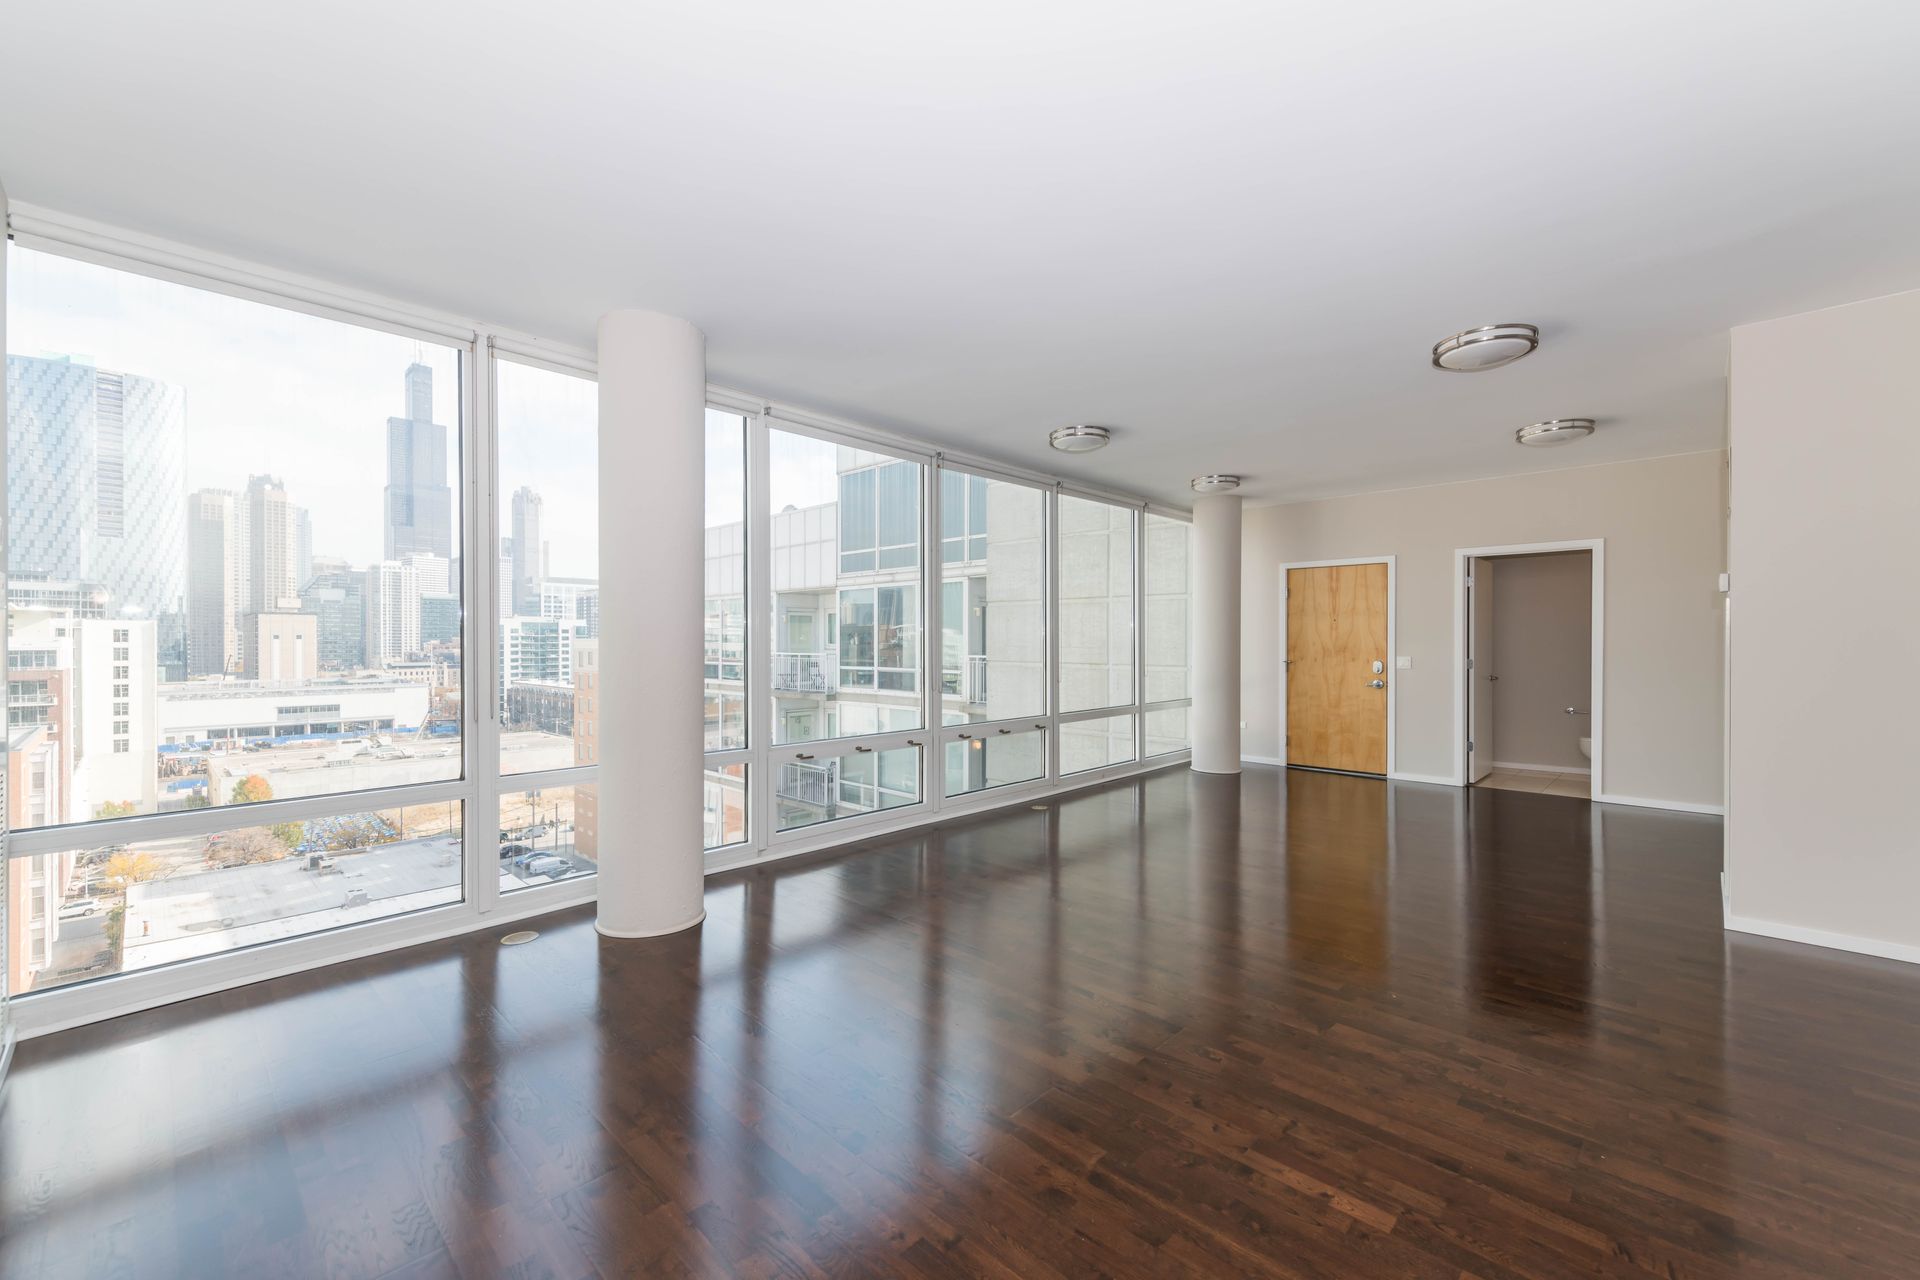 An empty apartment with a lot of windows and hardwood floors at 24 S Morgan Apartments.